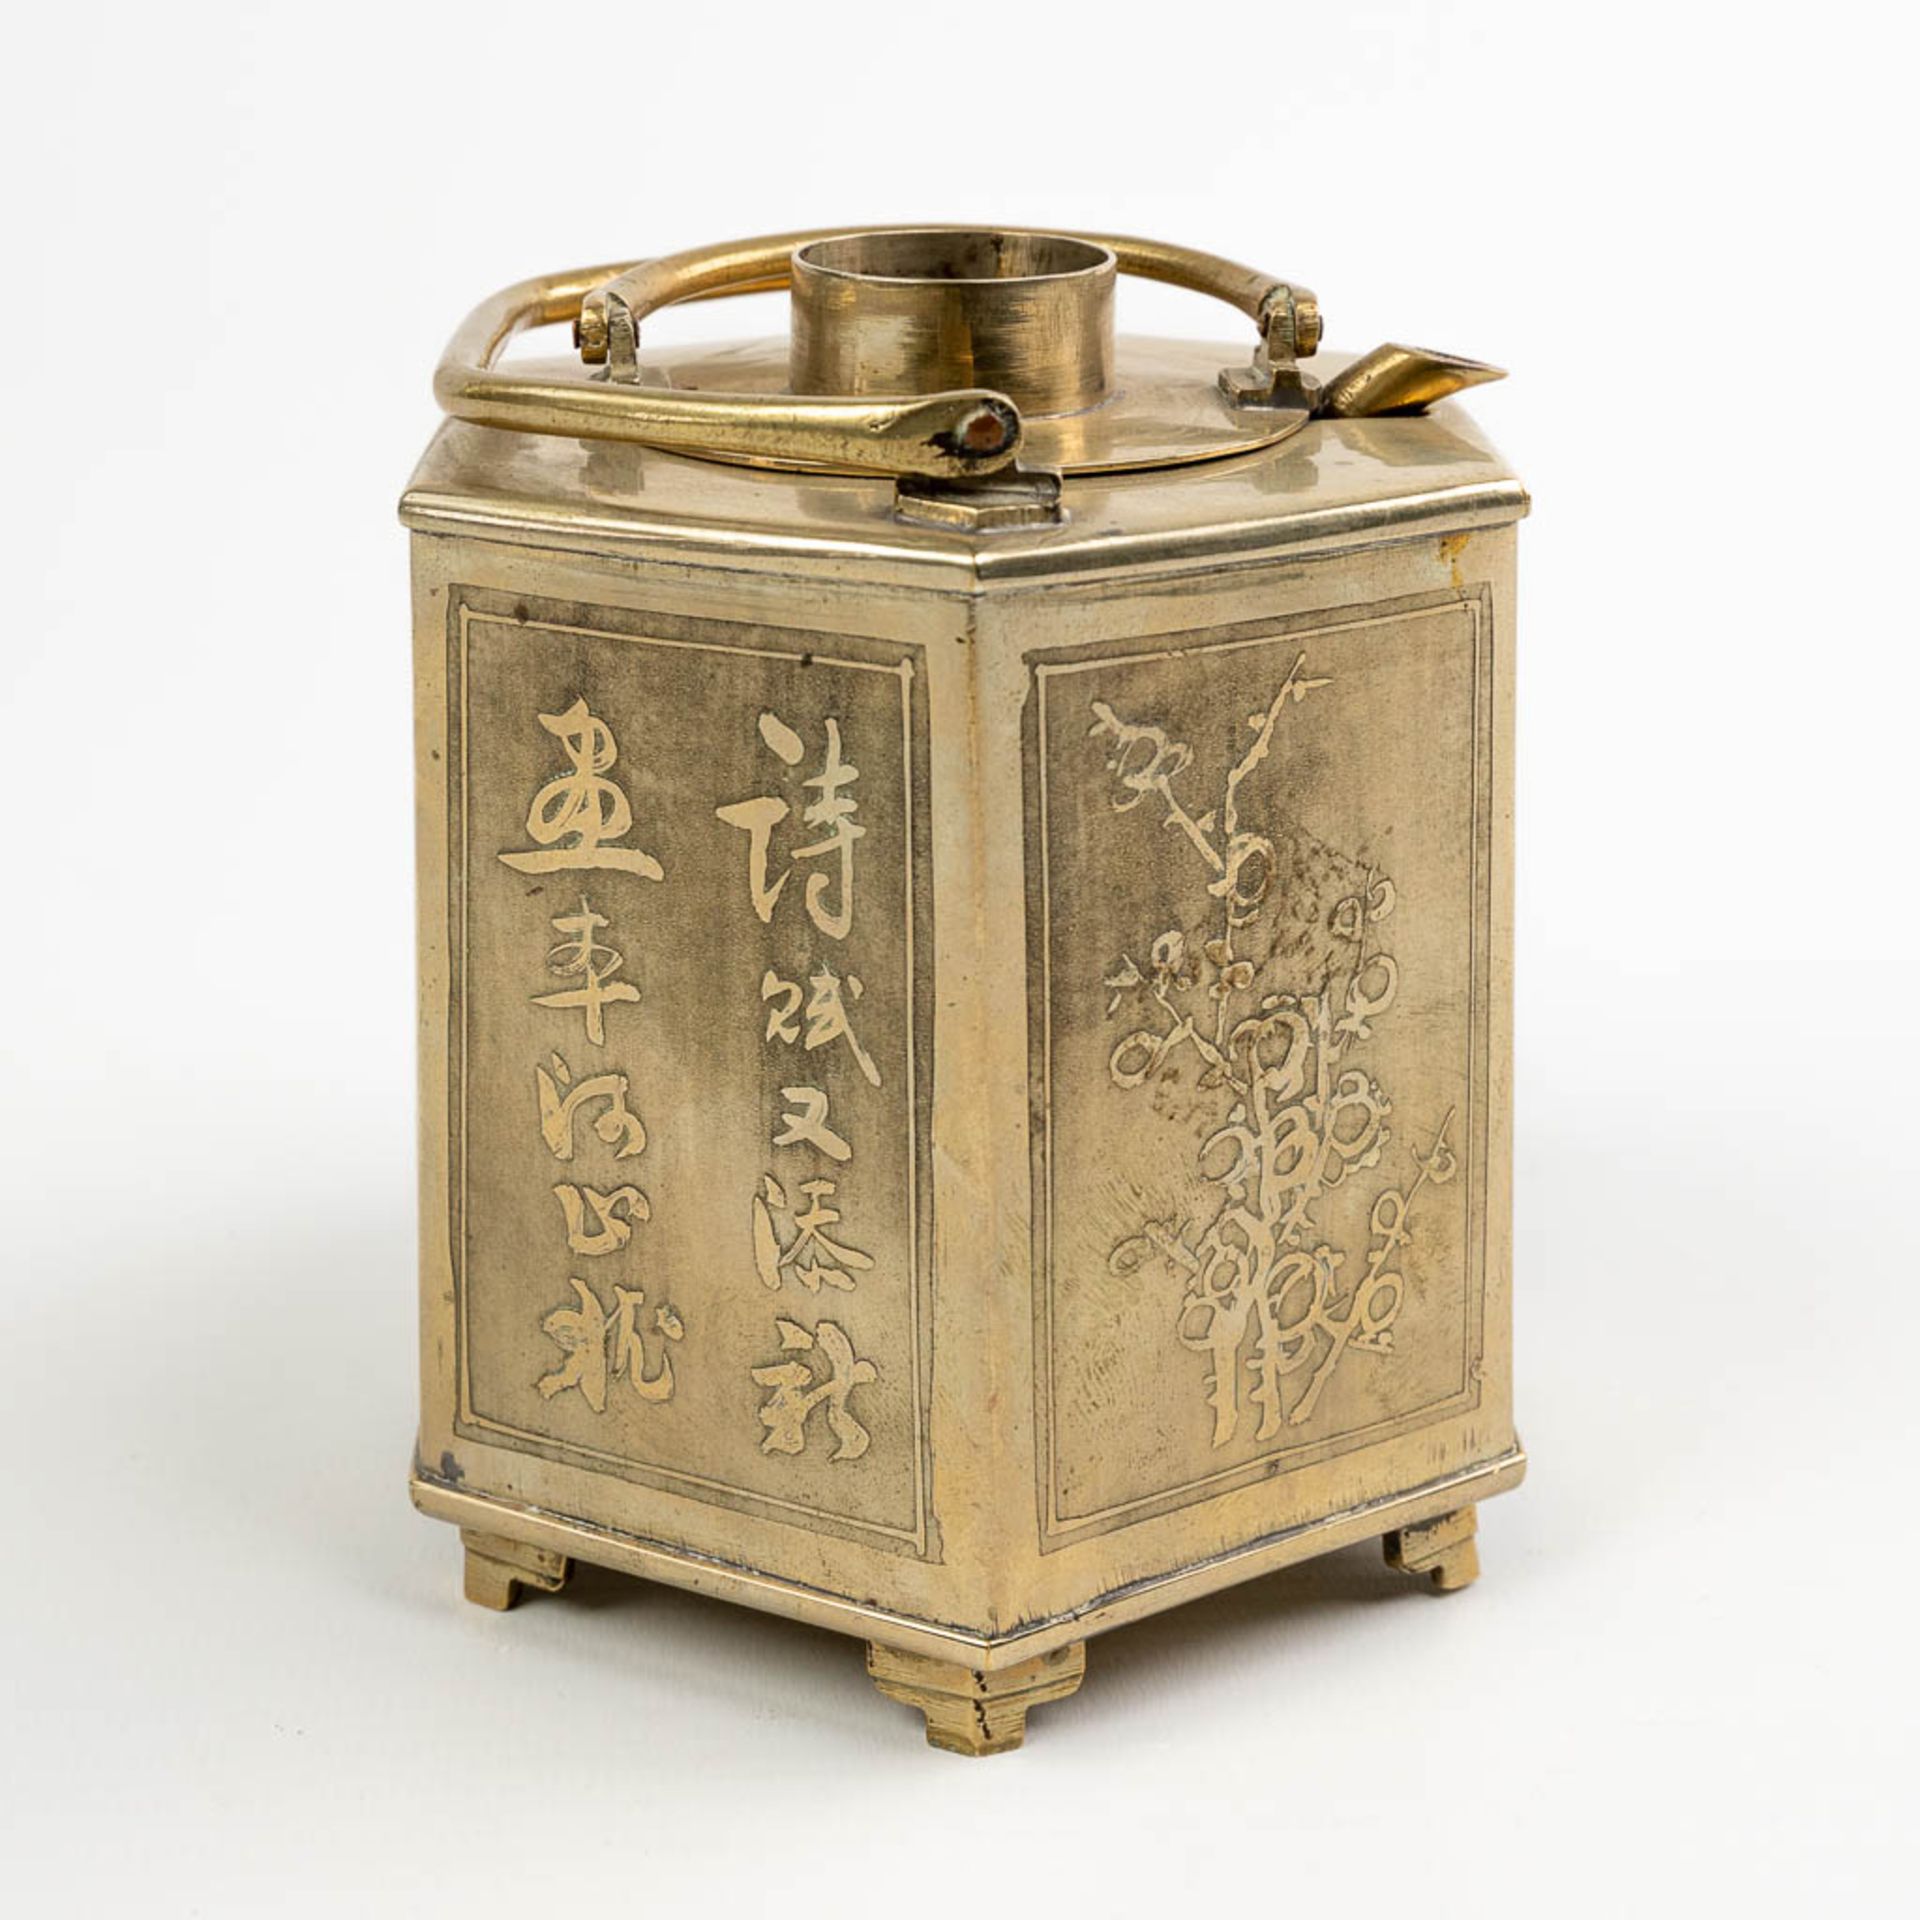 A 'Bain Marie' decorated with Japanese decor and made of silver-plated copper. - Image 12 of 13